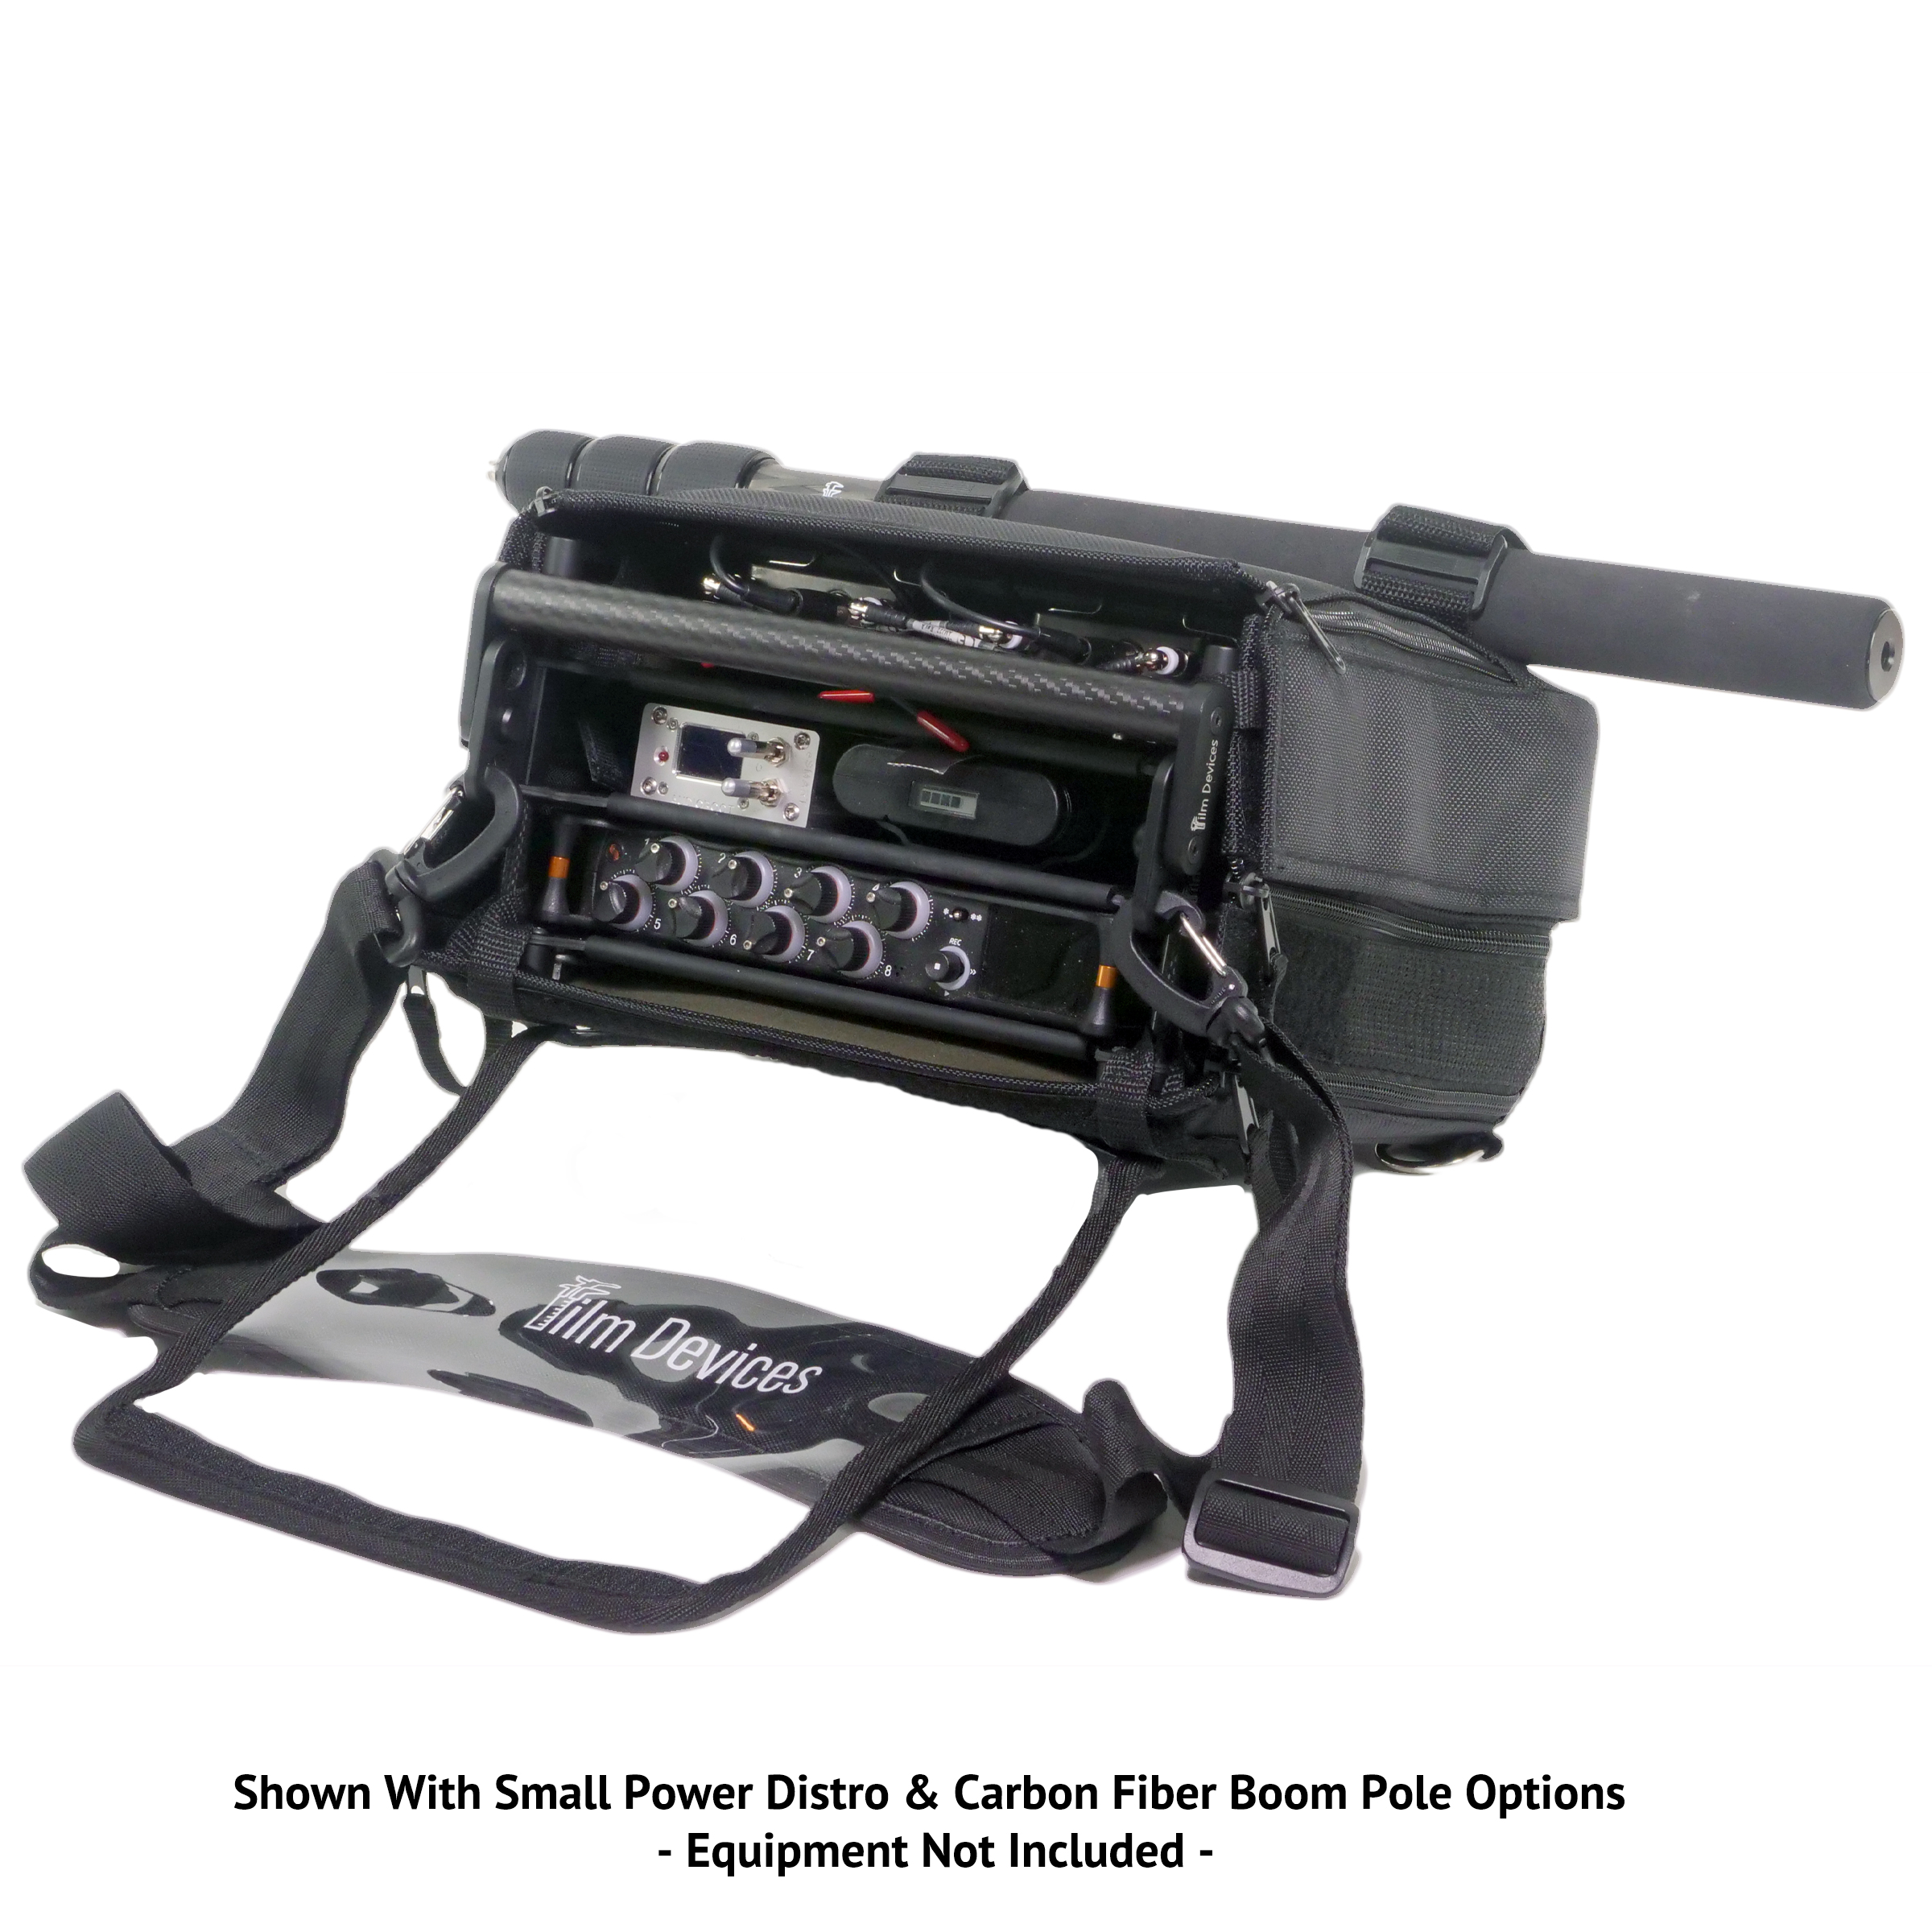 Rent a Sound Devices Mix Pre 10ii Location Sound Bag Kit, Best Prices |  ShareGrid Los Angeles, CA